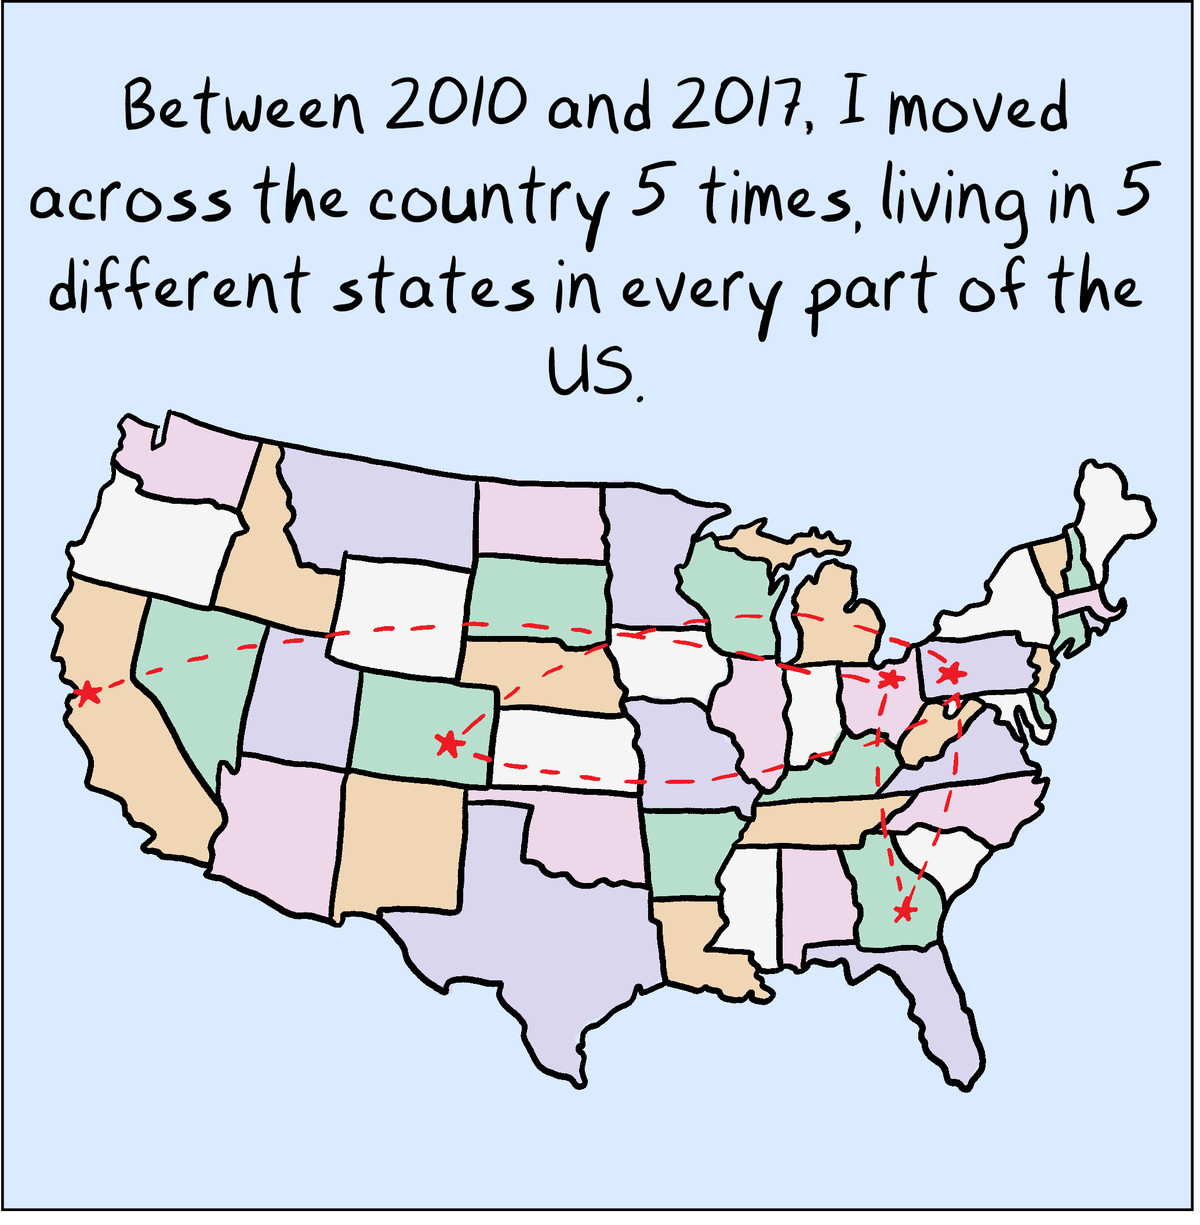 Between 2010 and 2017, I moved across the country 5 times, living in 5 different states in every part of the US.